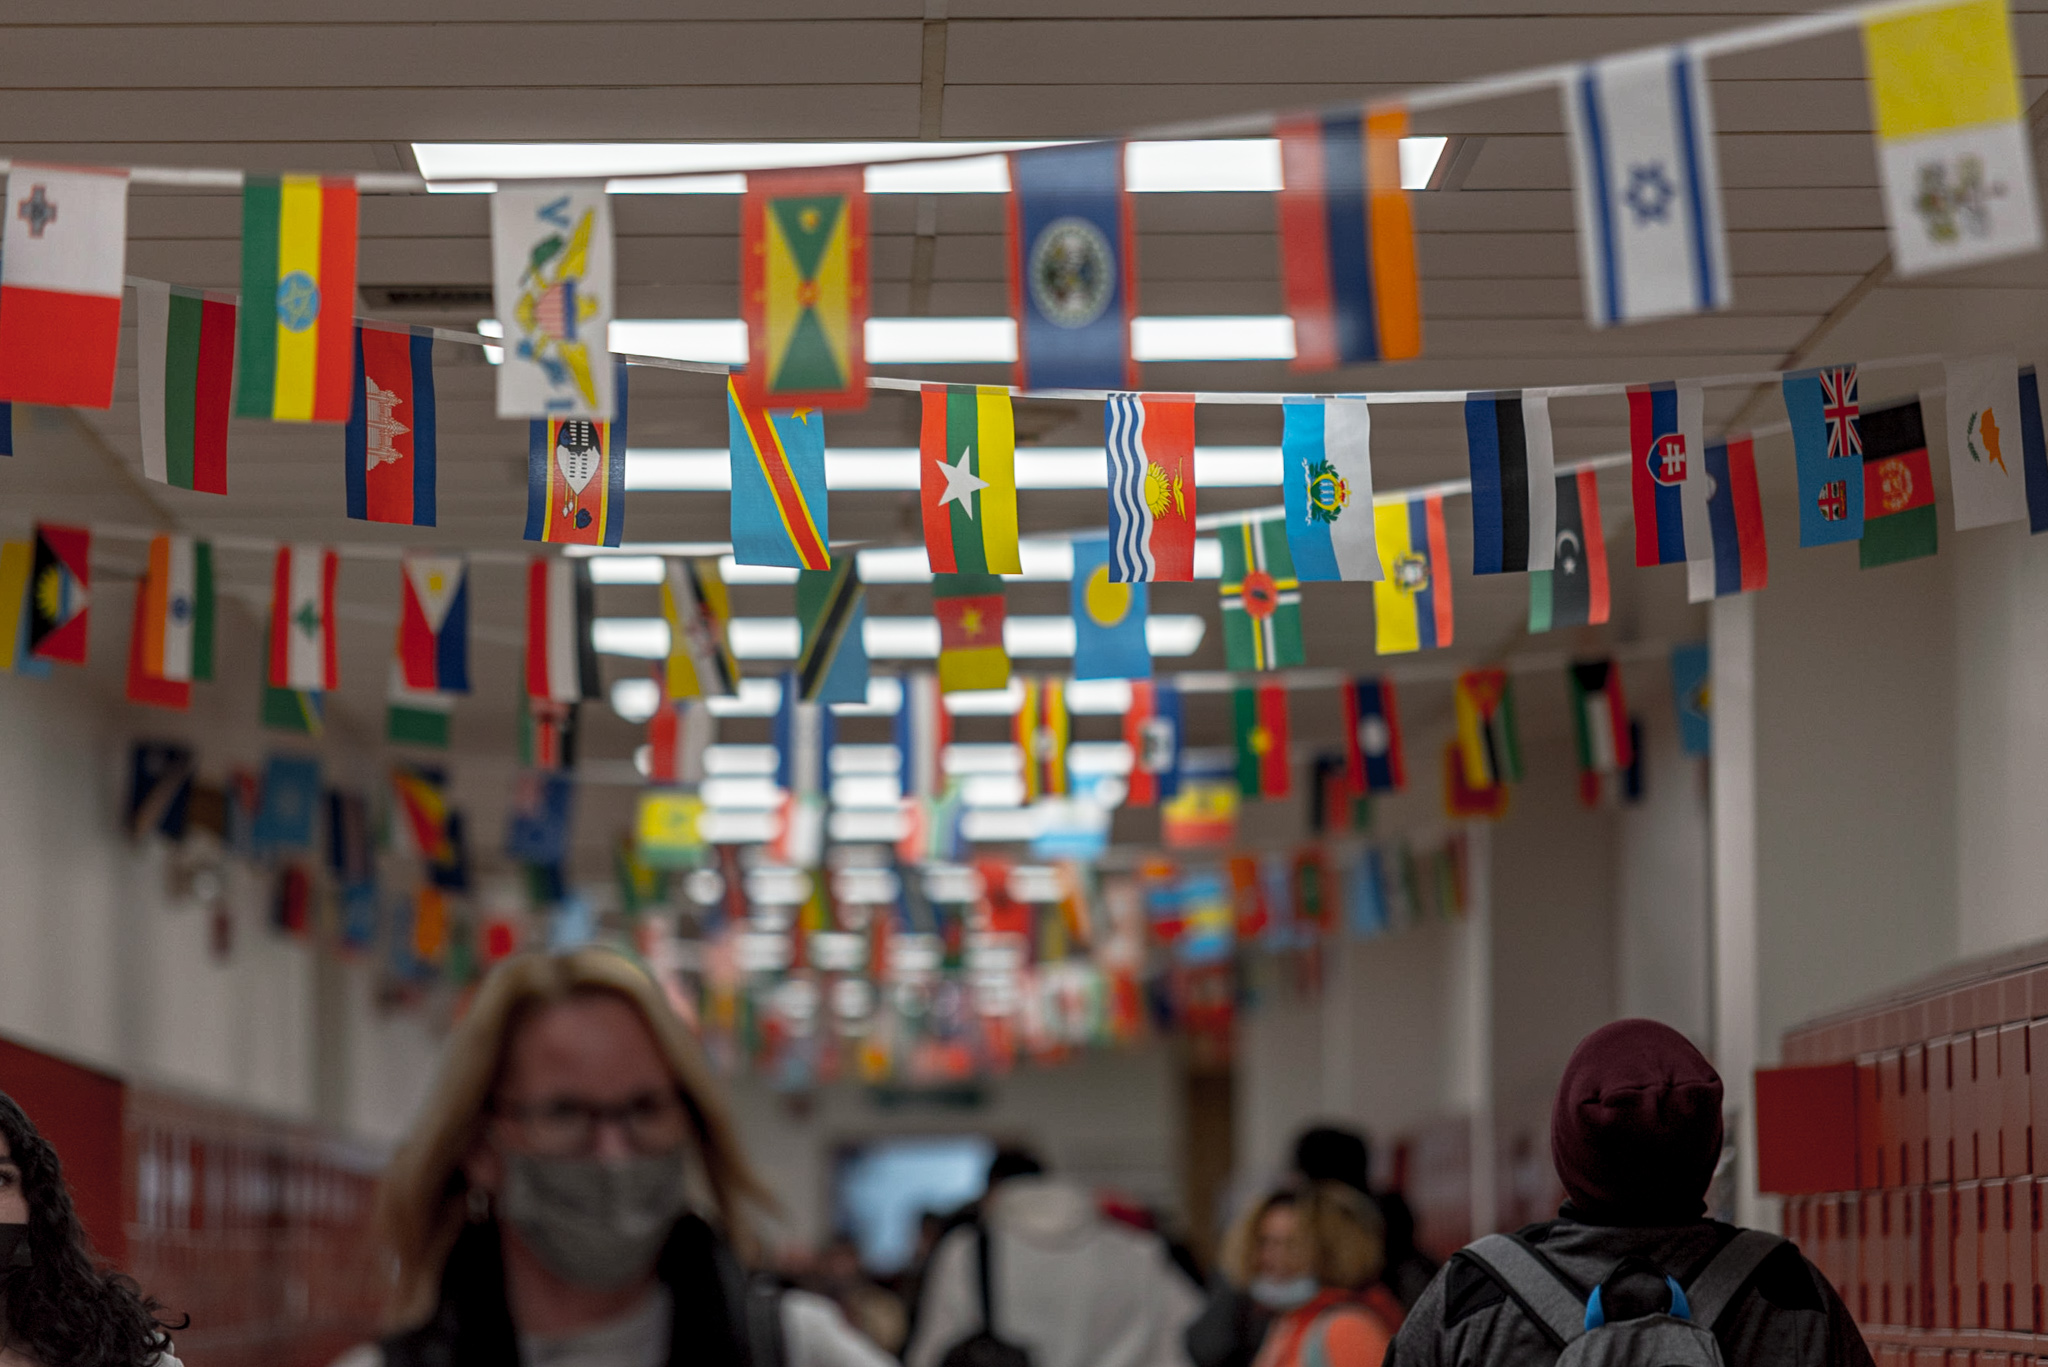 A school hallway with flags strung across the walkway.